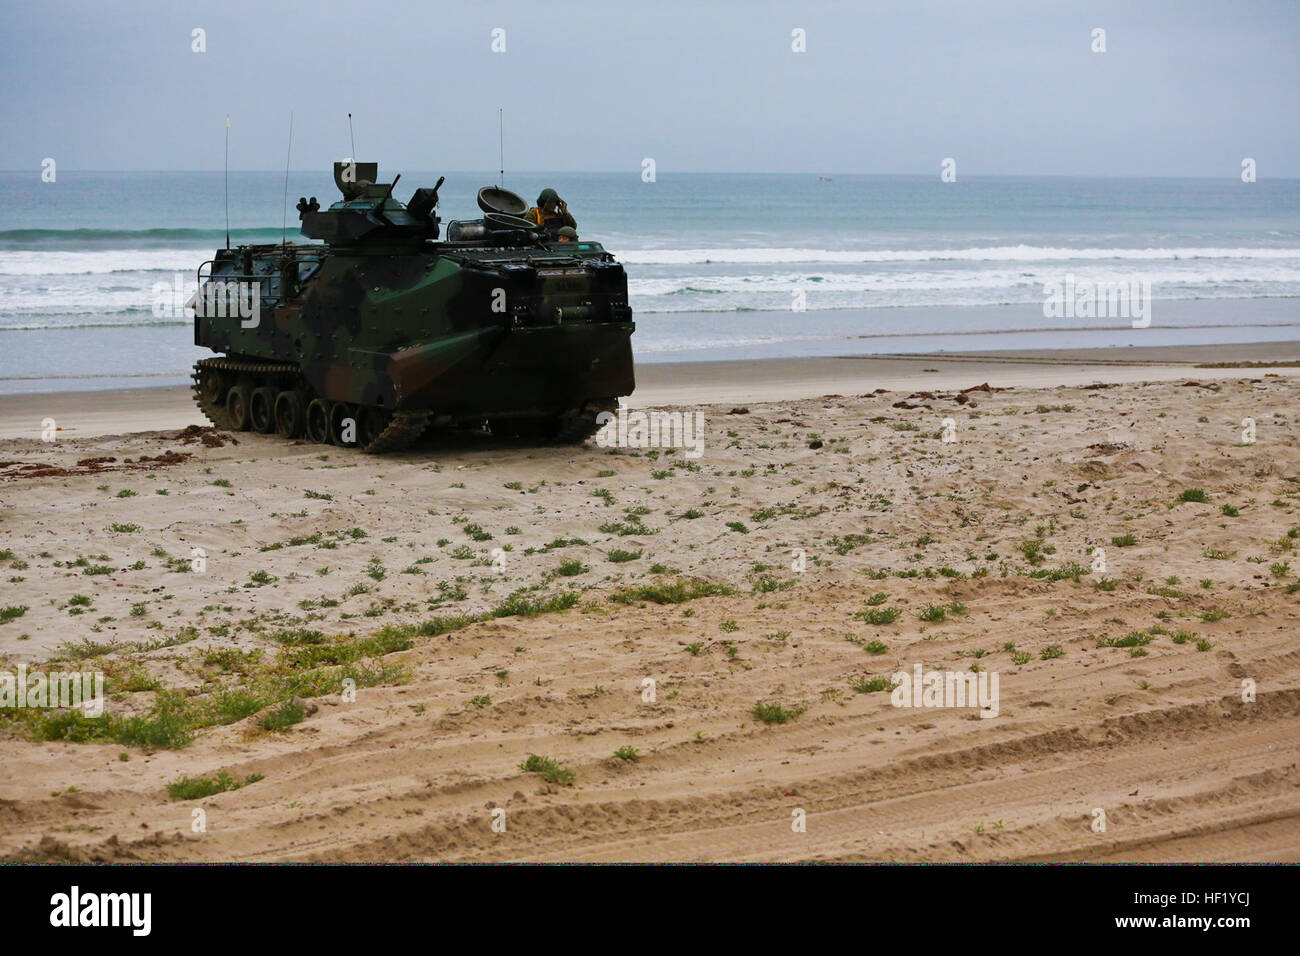 A U.S. Marine Corps AAV-7A1 assault amphibious vehicle performs an amphibious landing at Marine Corps Base Camp Pendleton, Calif., Feb. 19, 2014, as part of exercise Iron Fist 2014. Iron Fist is a three-week bilateral training event held annually between the U.S. Marine Corps and the Japan Ground Self-Defense Force designed to increase interoperability between the two services while aiding the Japanese in their continued development of amphibious capabilities. (U.S. Marine Corps photo by Lance Cpl. Ricardo Hurtado/Released) A U.S. Marine Corps AAV-7A1 assault amphibious vehicle performs an amp Stock Photo